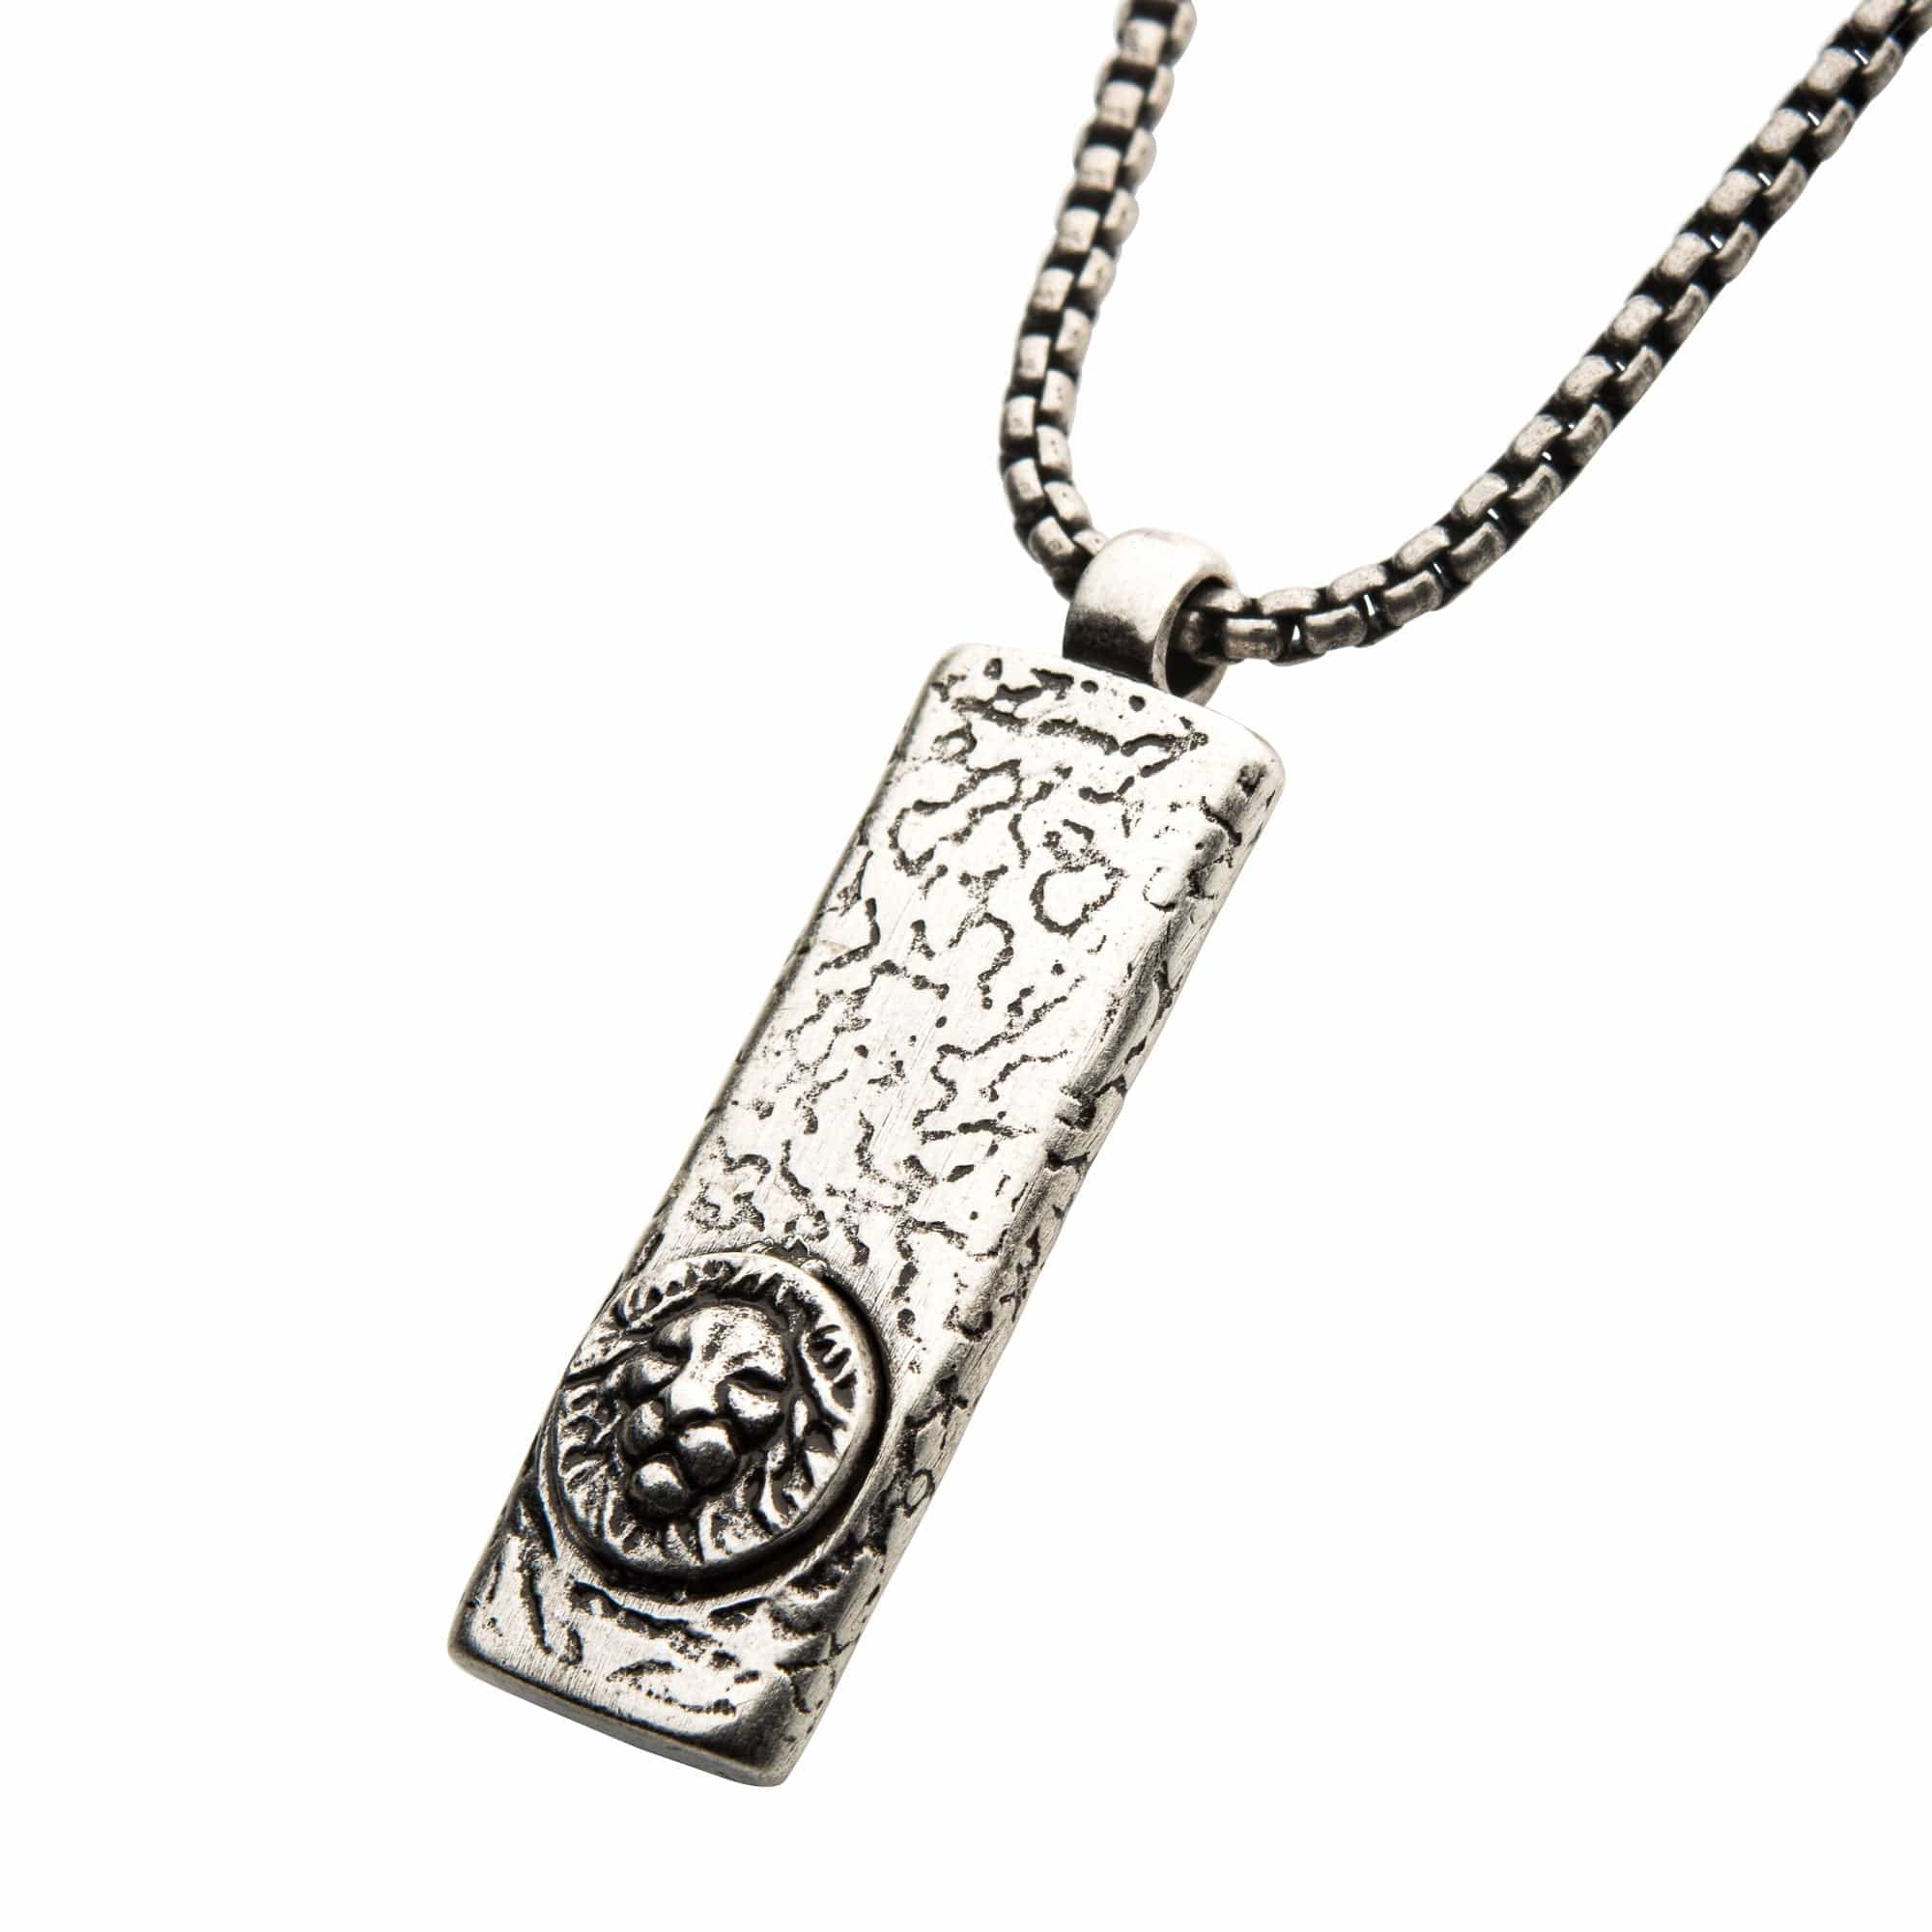 INOX JEWELRY Pendants Antiqued Silver Tone Stainless Steel Oxidize Finish Lion Head Inlaid Tag Pendant with Chain SSP13645ASNK